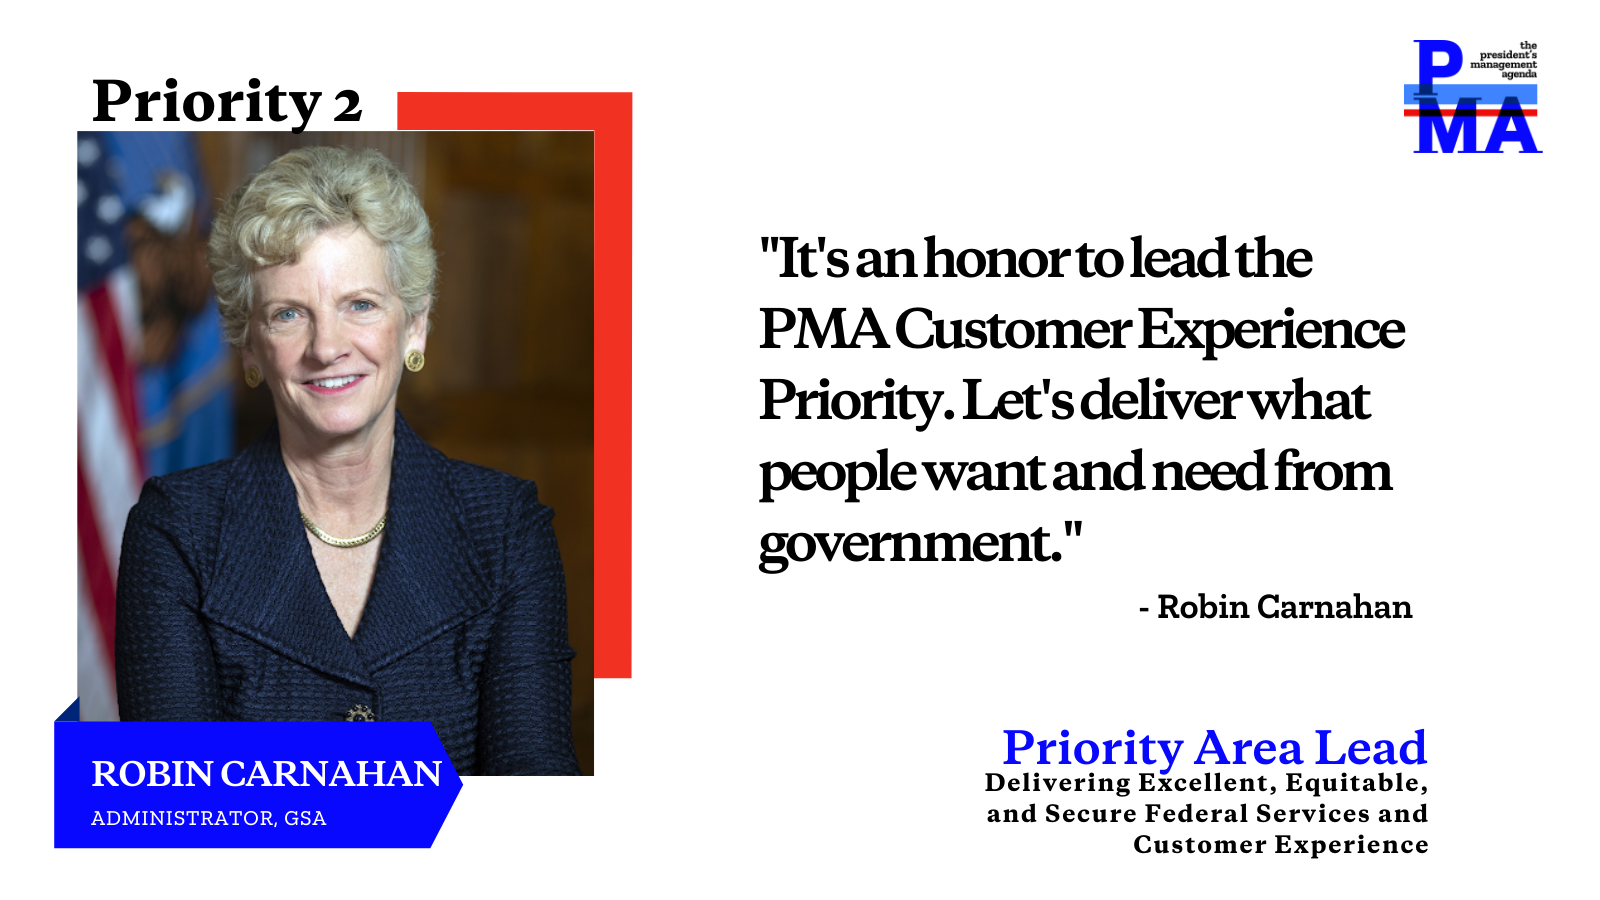 Social card of Robin Carnahan with text: It's an honor to lead the PMA Customer Experience Priority. Let's deliver what people want and need from government.